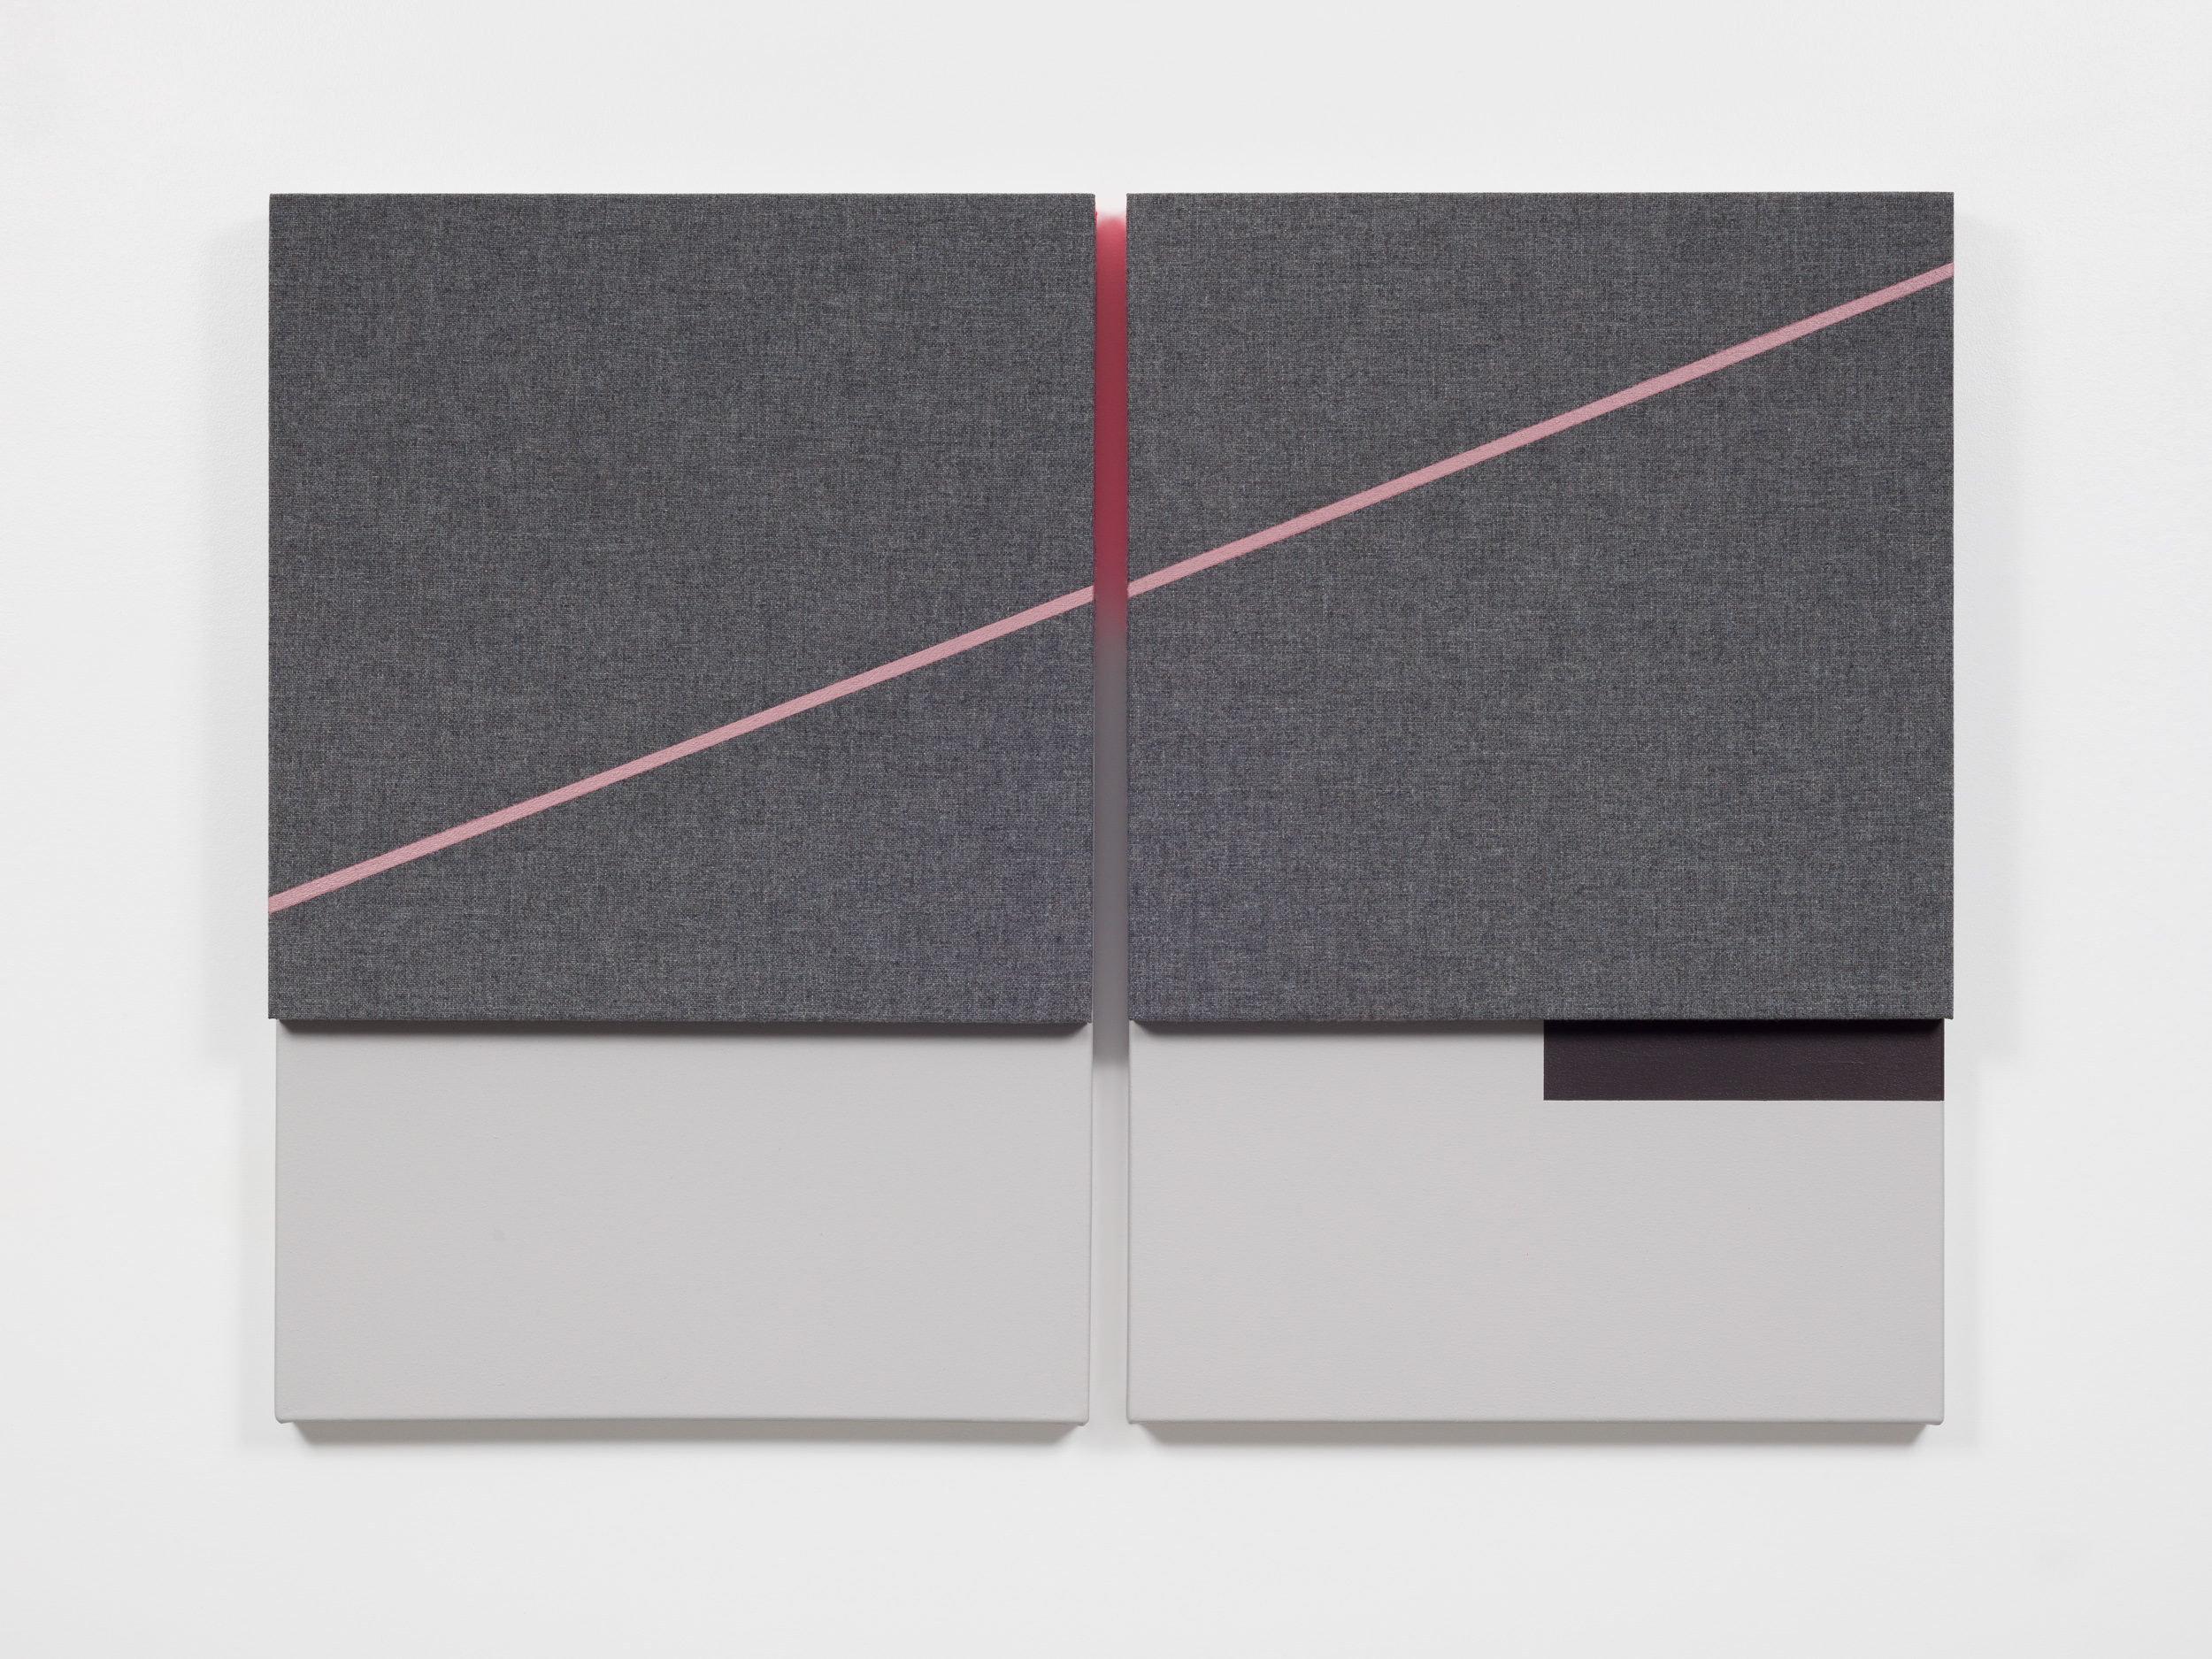 Layered squares of acoustic panel on a white wall. The top layer is gray with a diagonal pink line running across both panels.